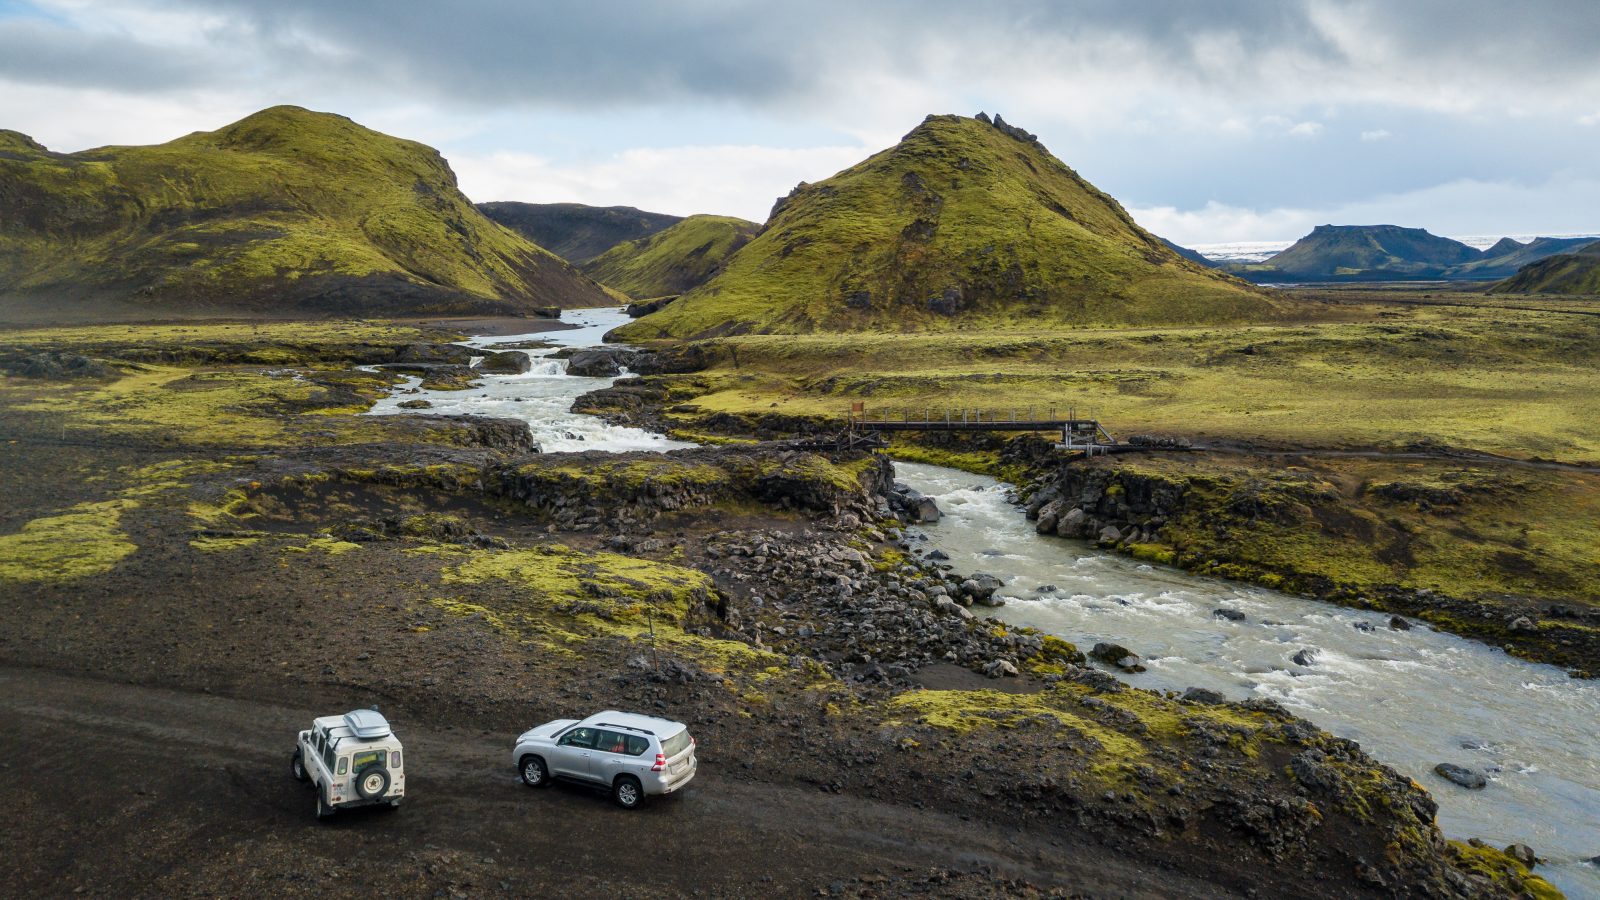 two 4wd vehicles on an F-road by a river in the highlands